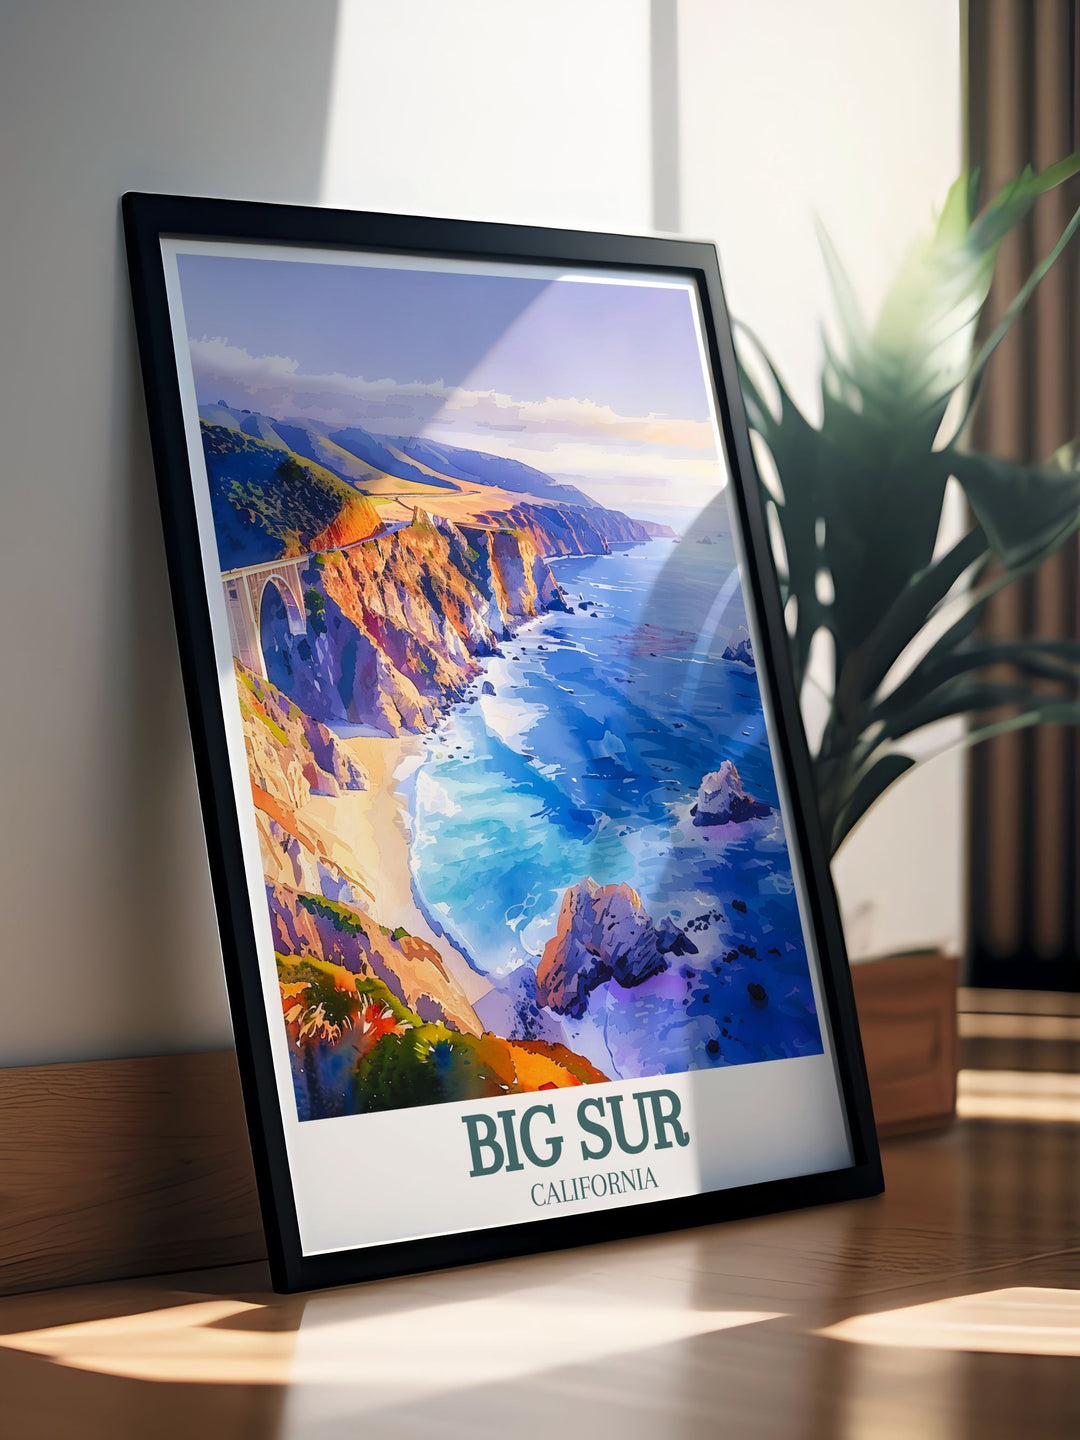 Featuring the dramatic cliffs and scenic vistas of Big Sur, this travel poster captures the essence of Californias coastal beauty, perfect for those who appreciate natural landscapes.